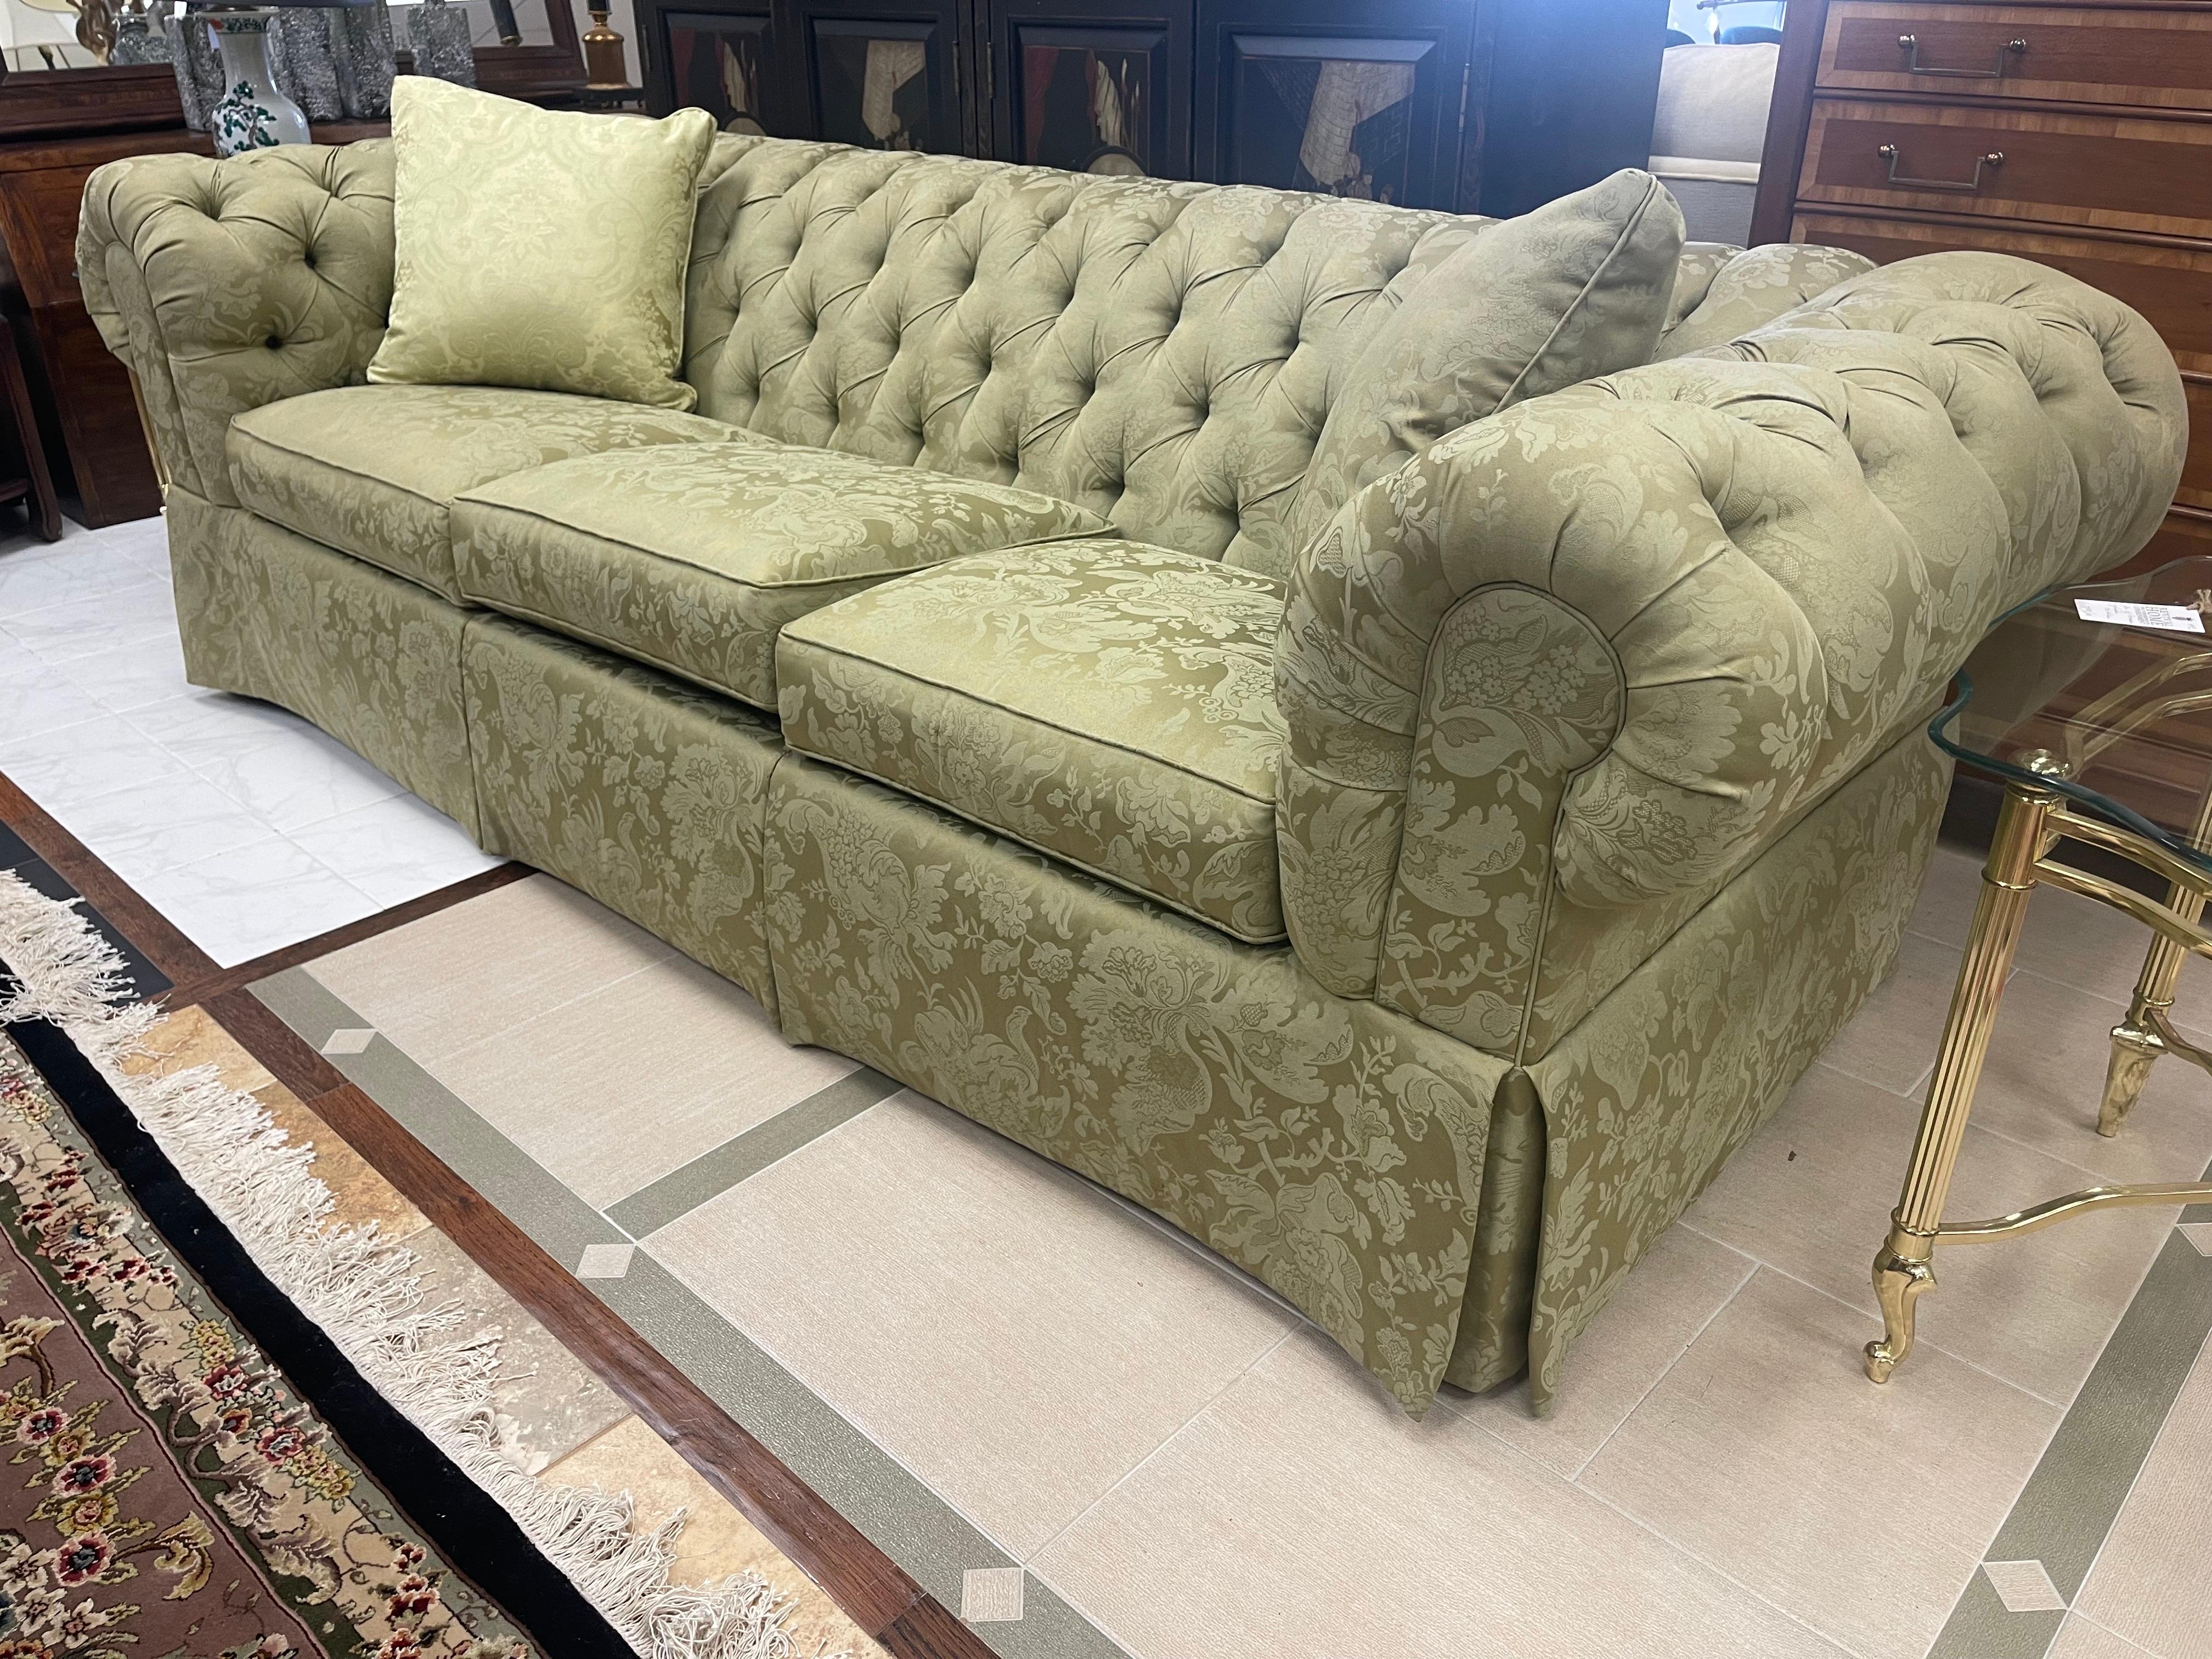 Chesterfield Tufted Three Seater Sofa in Rare Olive Paisley Upholstery 8